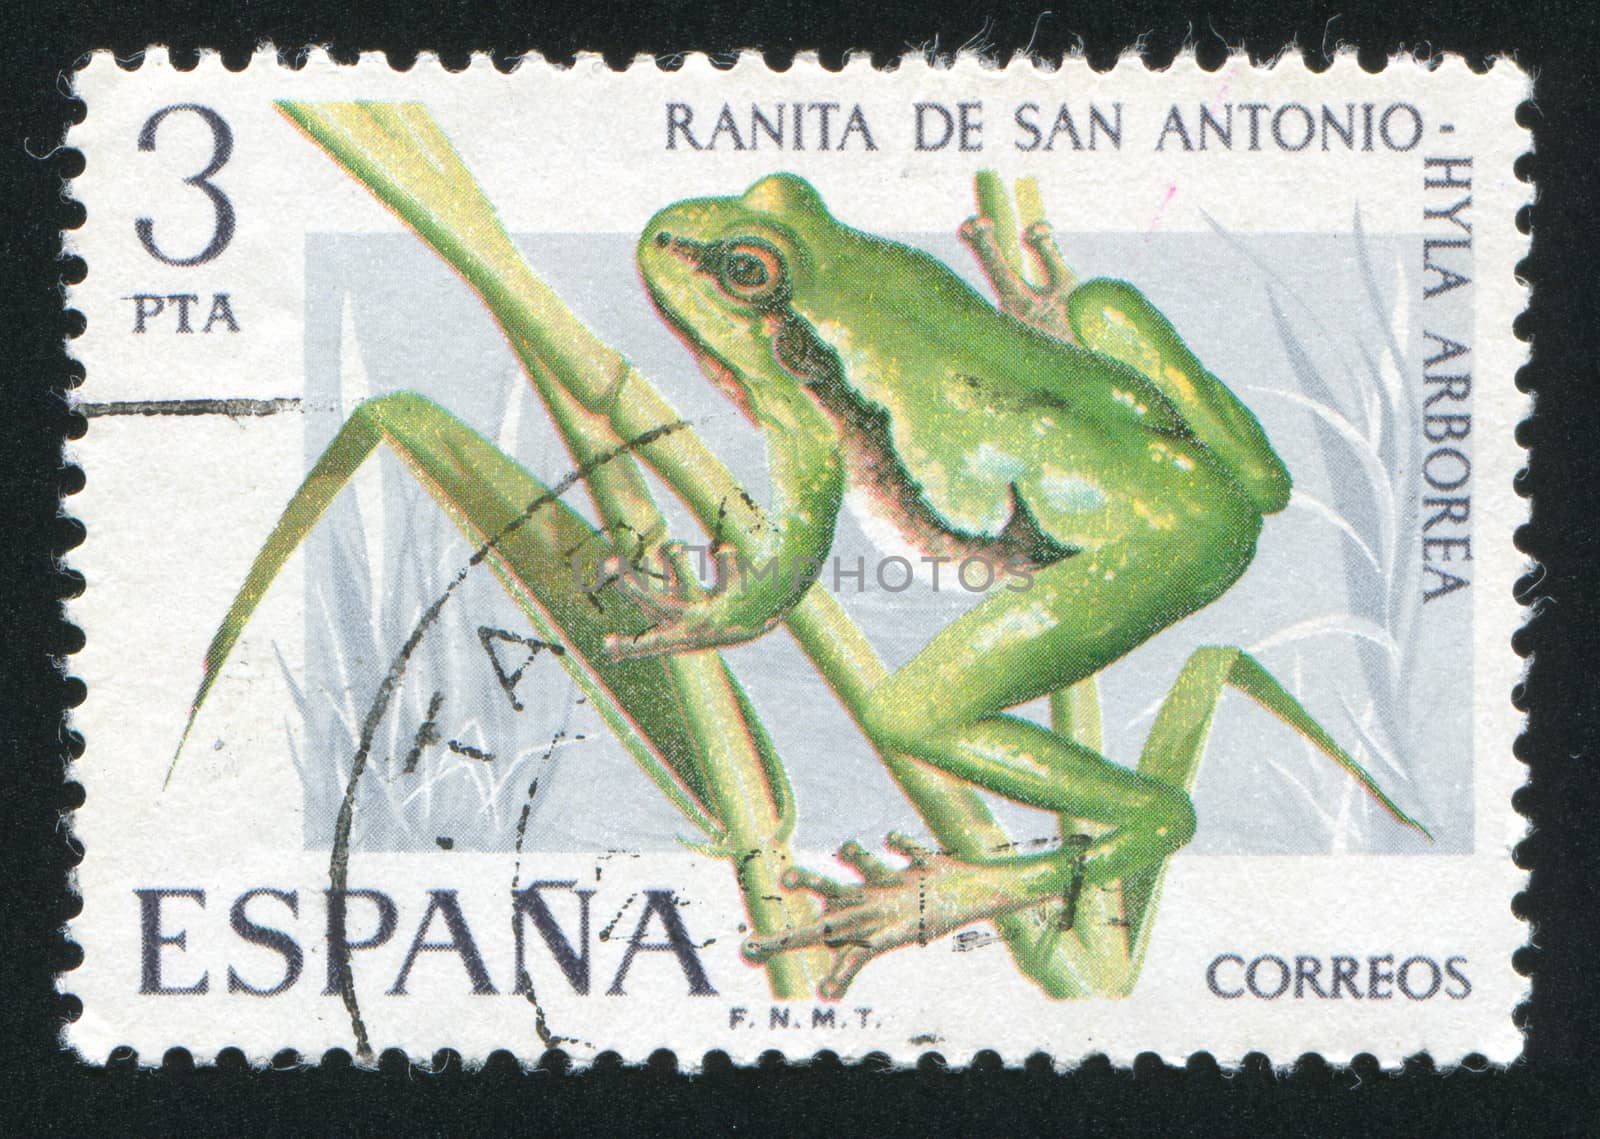 SPAIN - CIRCA 1975: stamp printed by Spain, shows Tree Toad, circa 1975